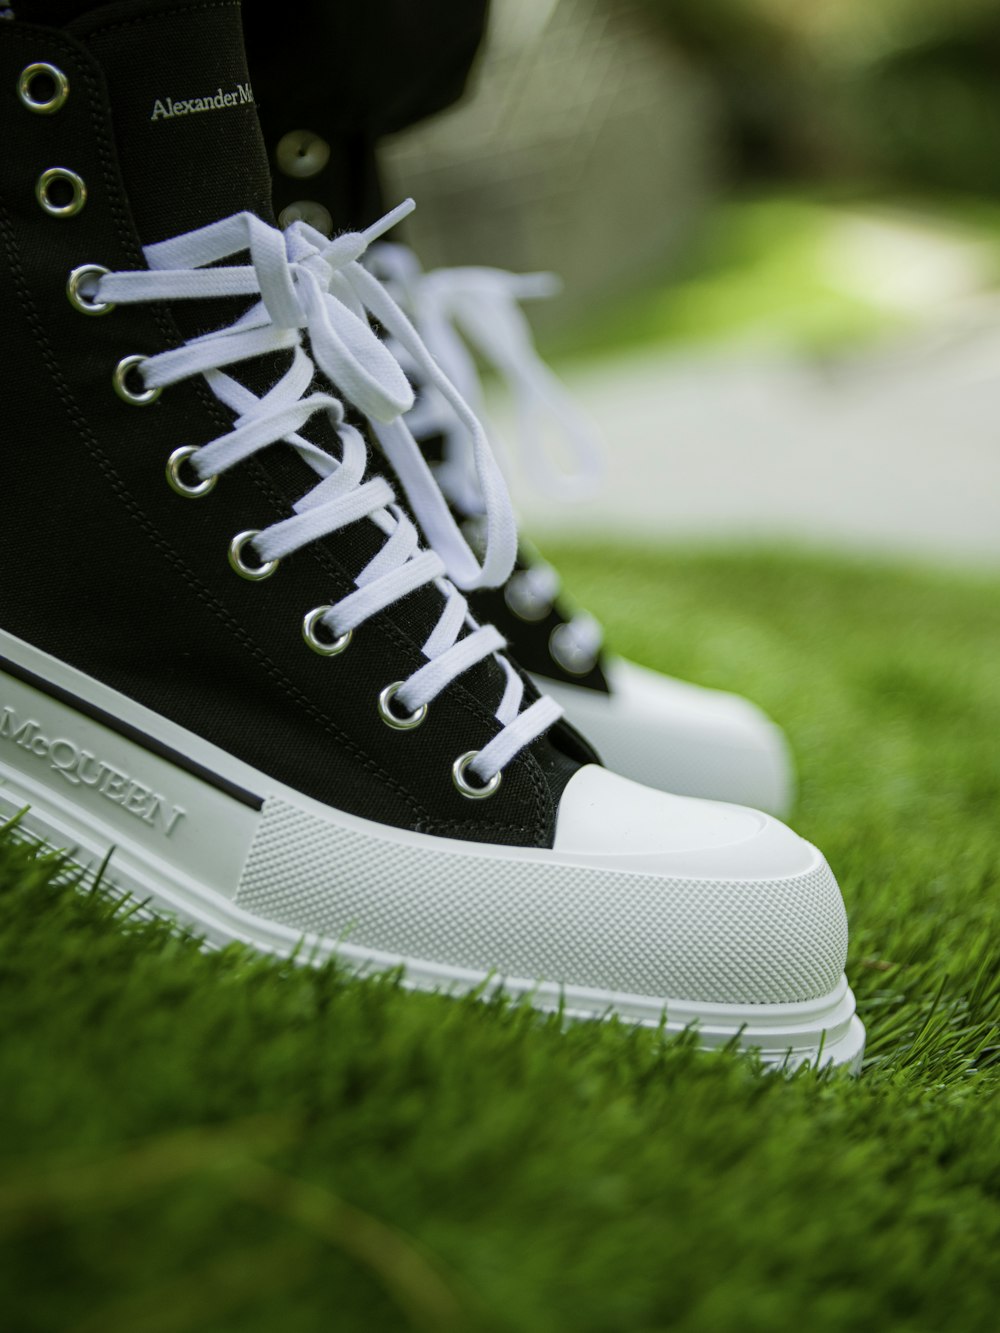 black and white nike athletic shoes on green grass during daytime